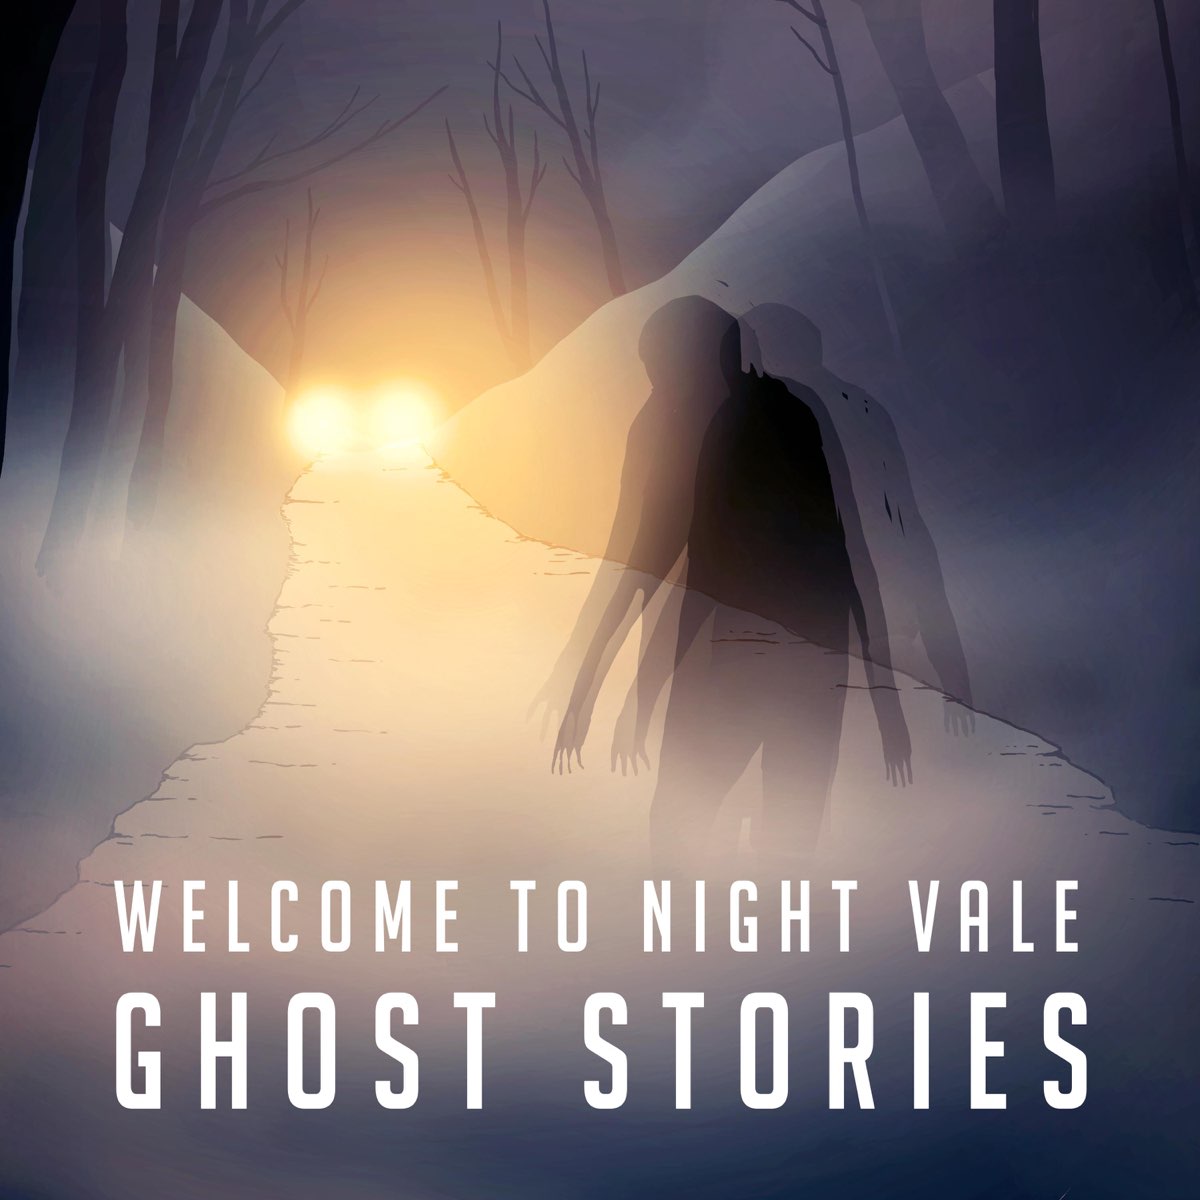 Welcome to live. Ночь для stories. The story of the Night. A Night's Ghost story. Песня Ghost story.